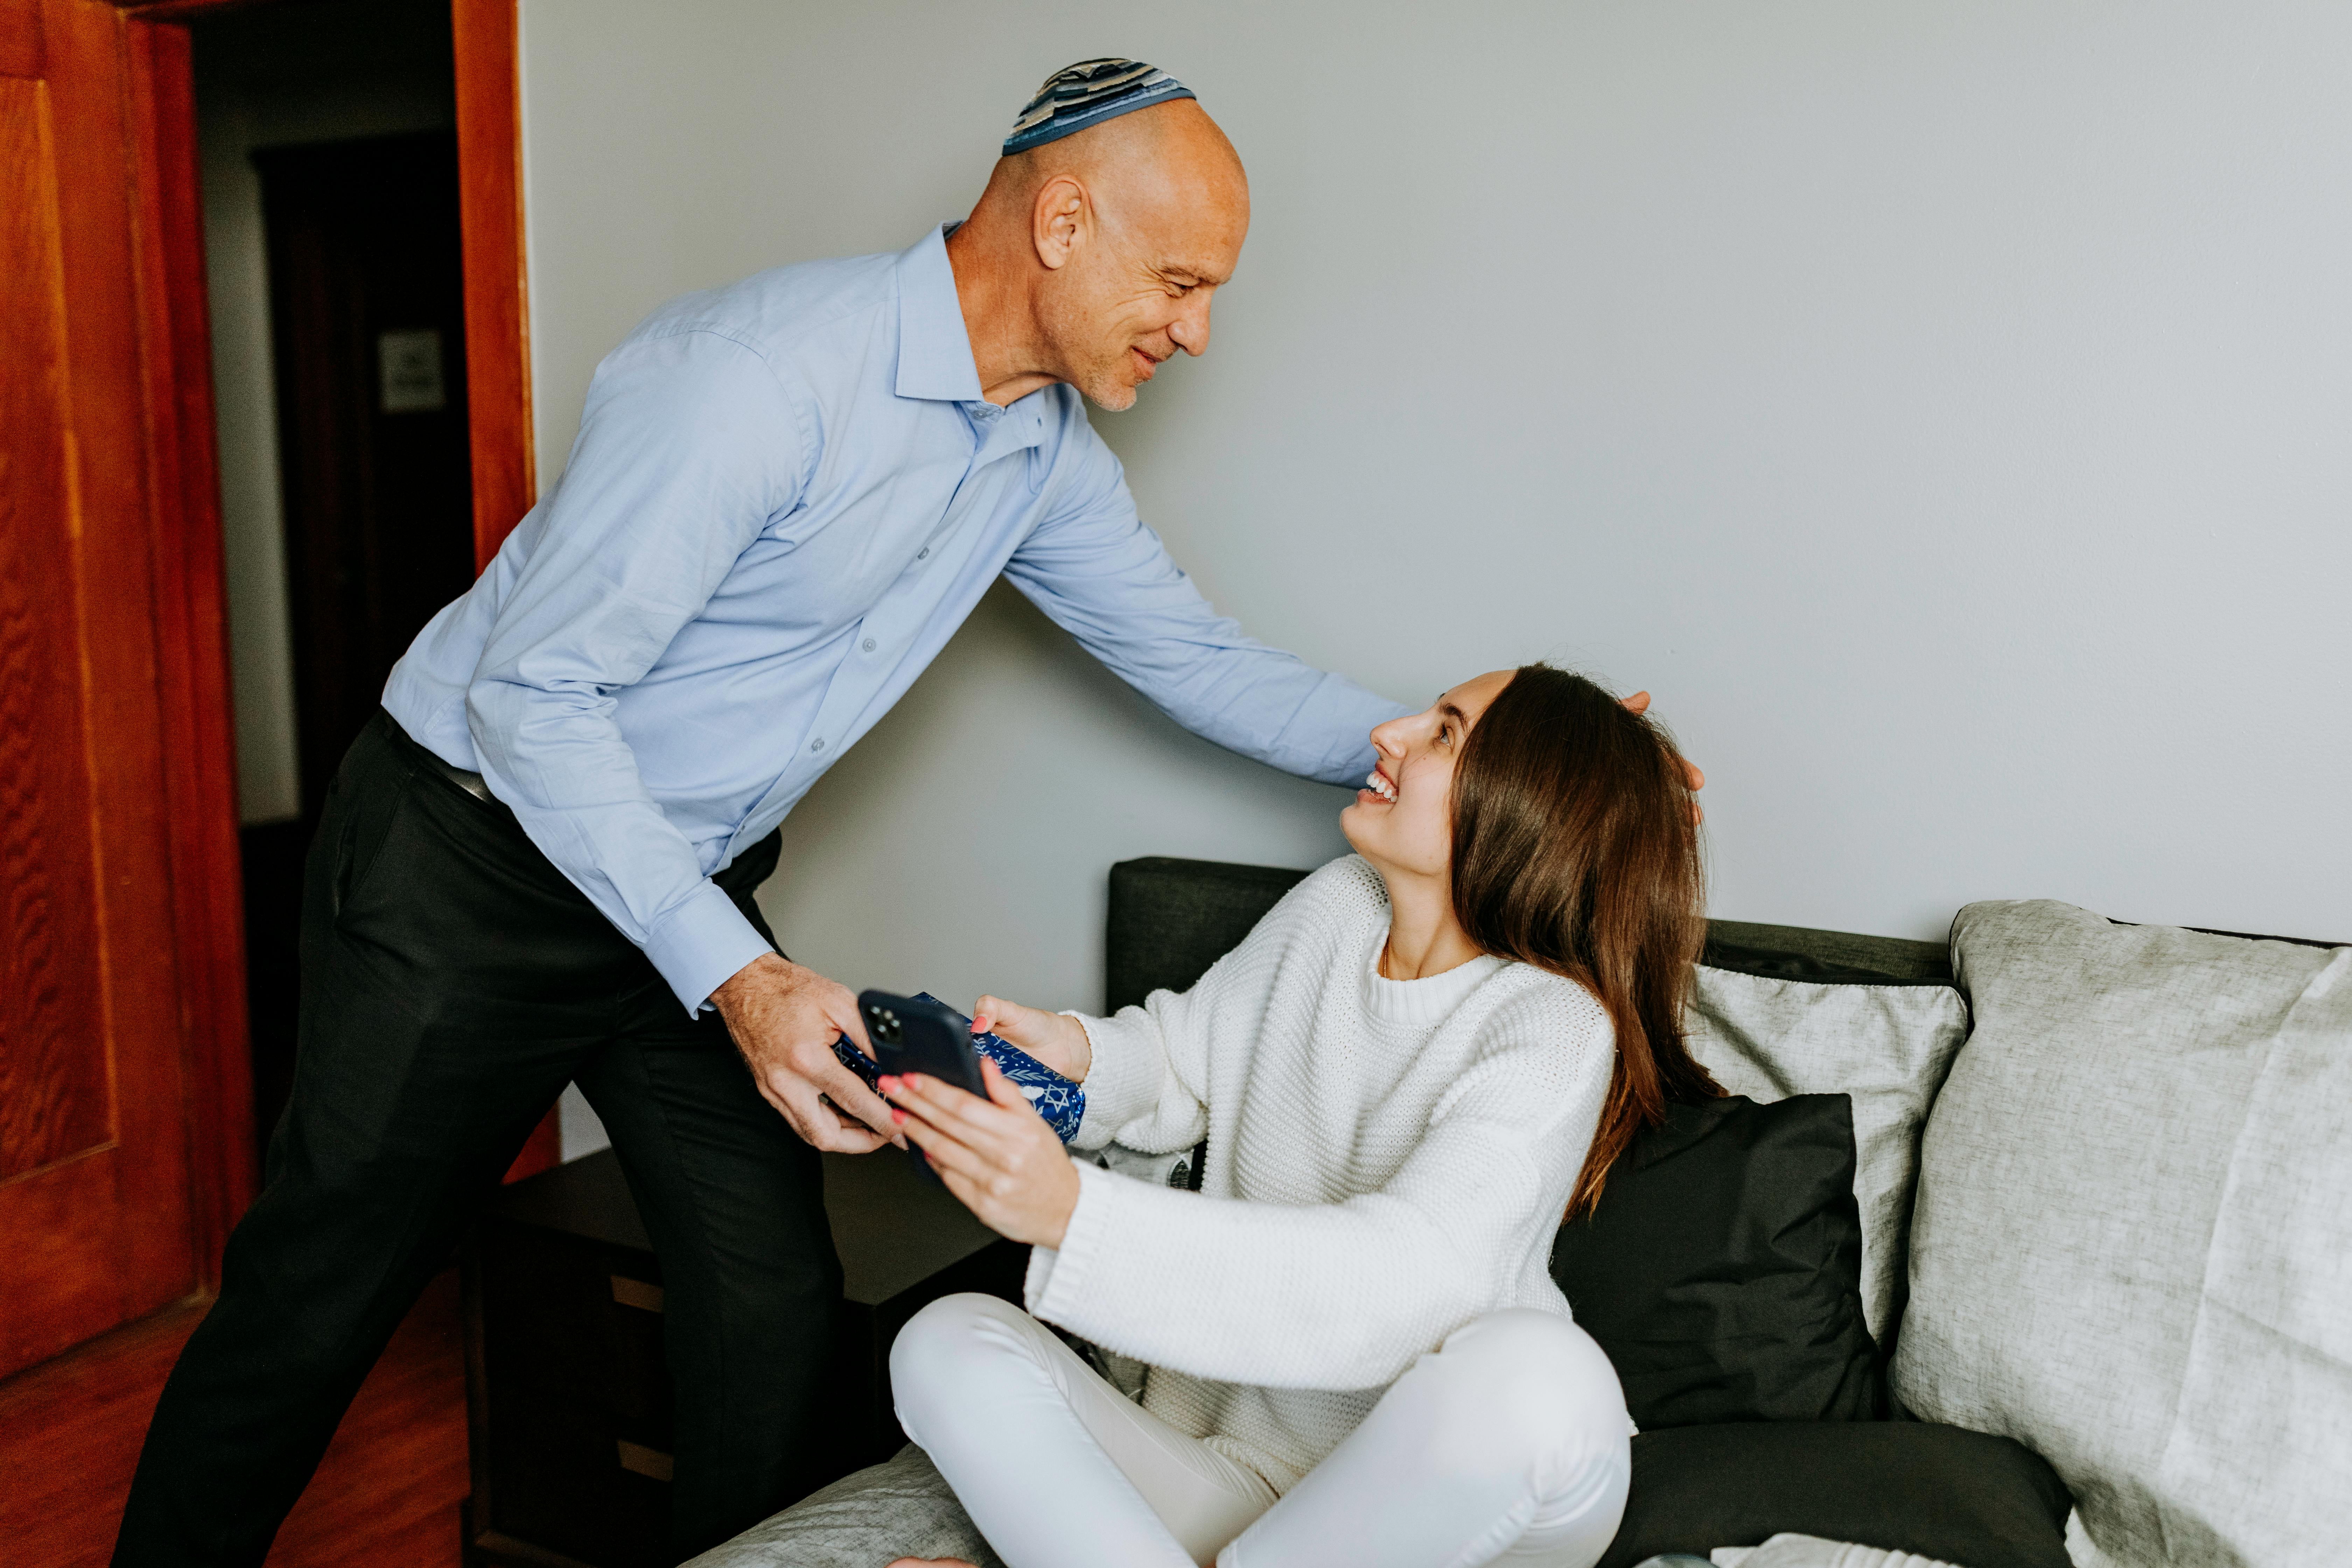 An older man reaching out to hug his daughter who's seated on a couch | Source: Pexels